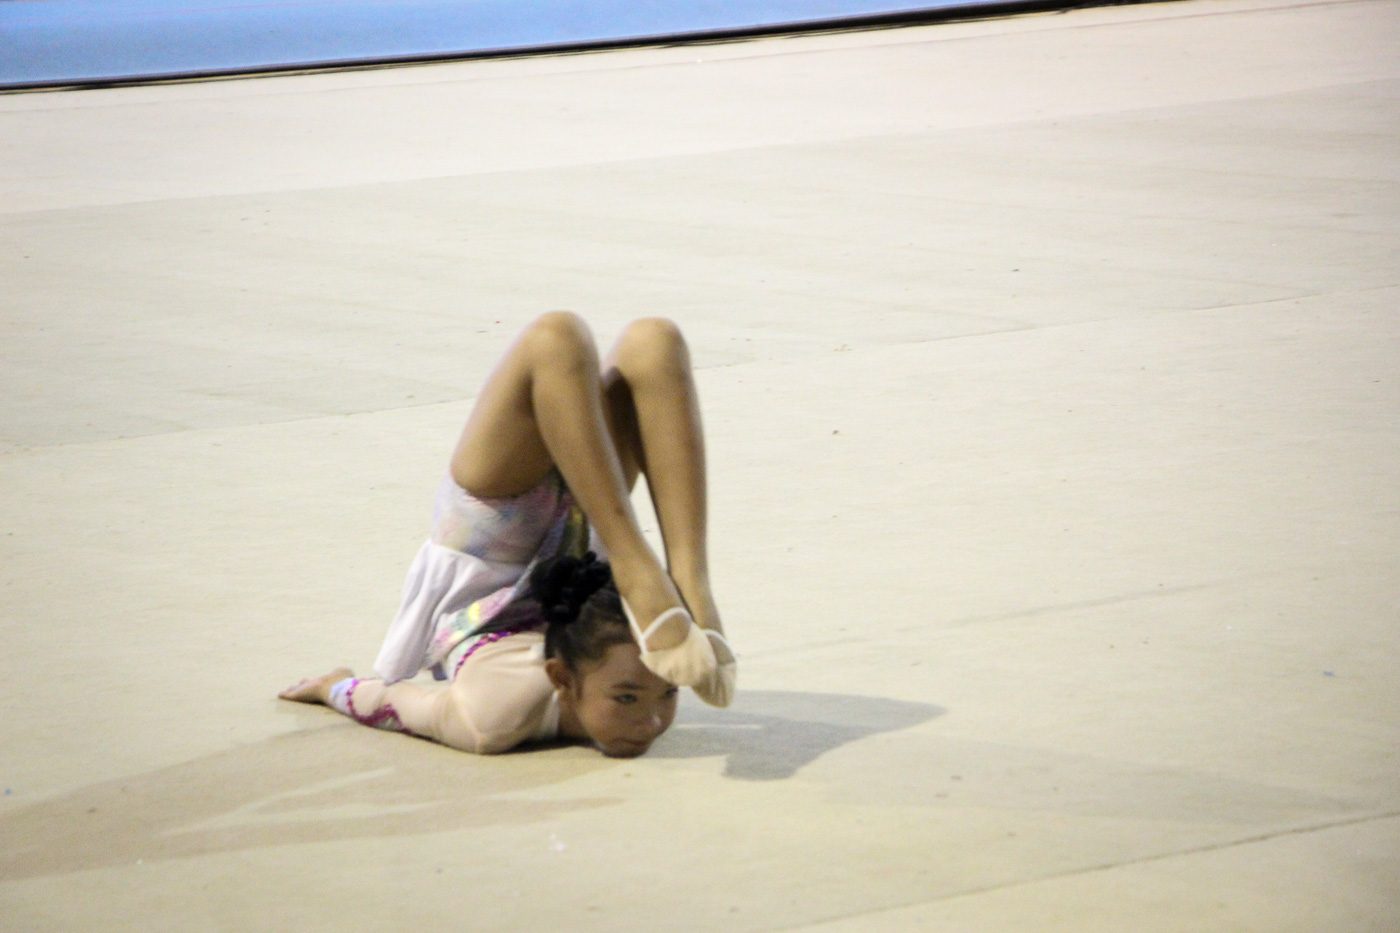 FIRST EVENT. A 10-year old shows what she can do during the Gynastics eliminations at the Biniyaran Sports Complex in Antique. Photo by Rey Anthony Villaverde   